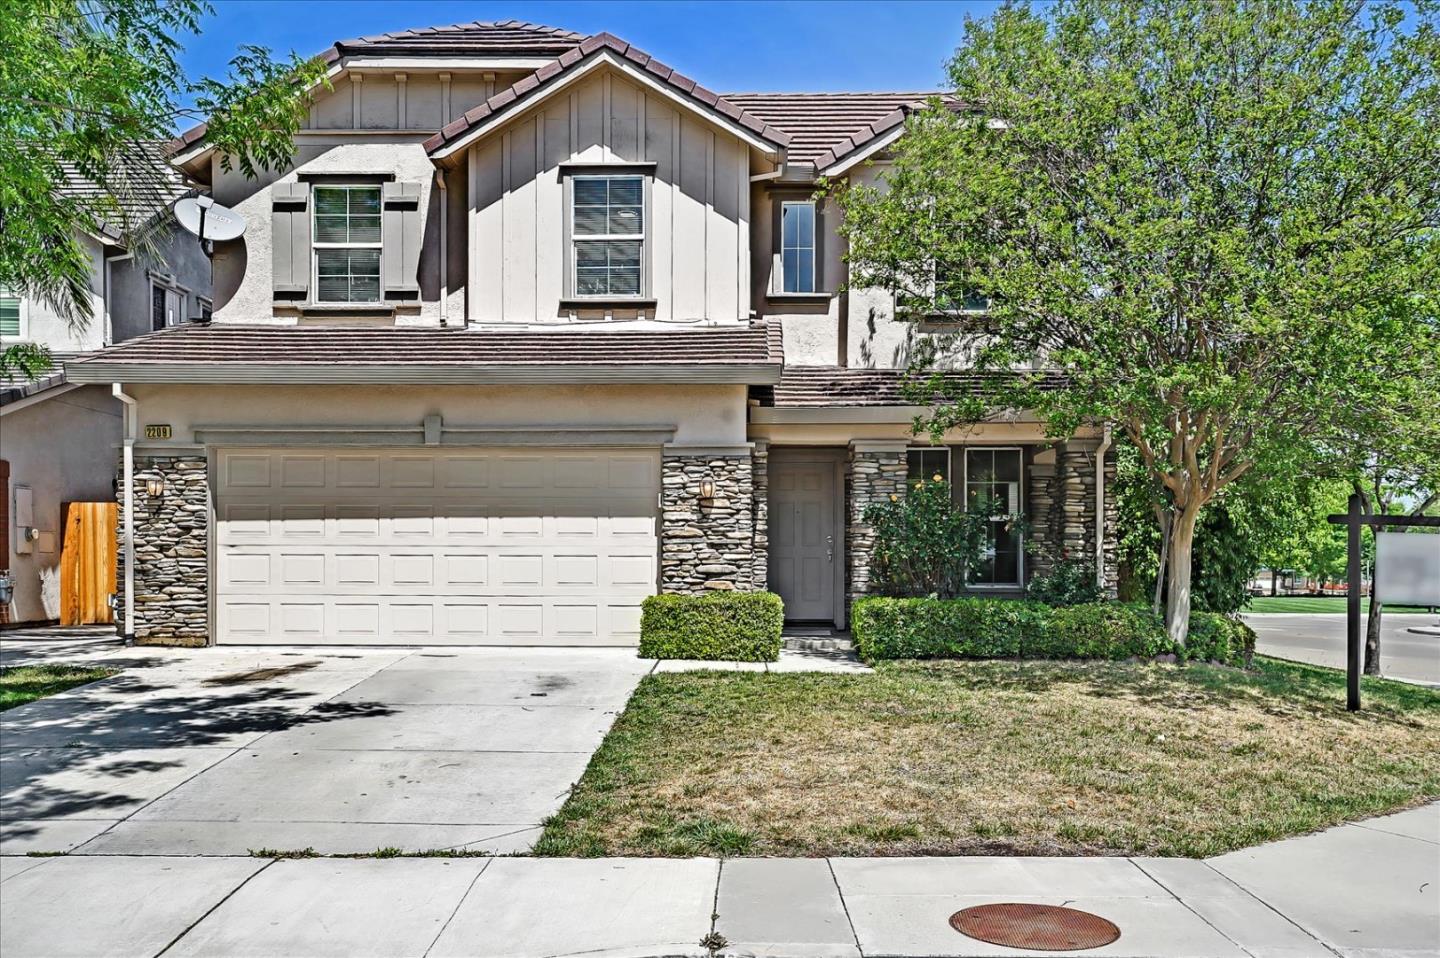 Photo of 2209 Gibralter Ln in Tracy, CA